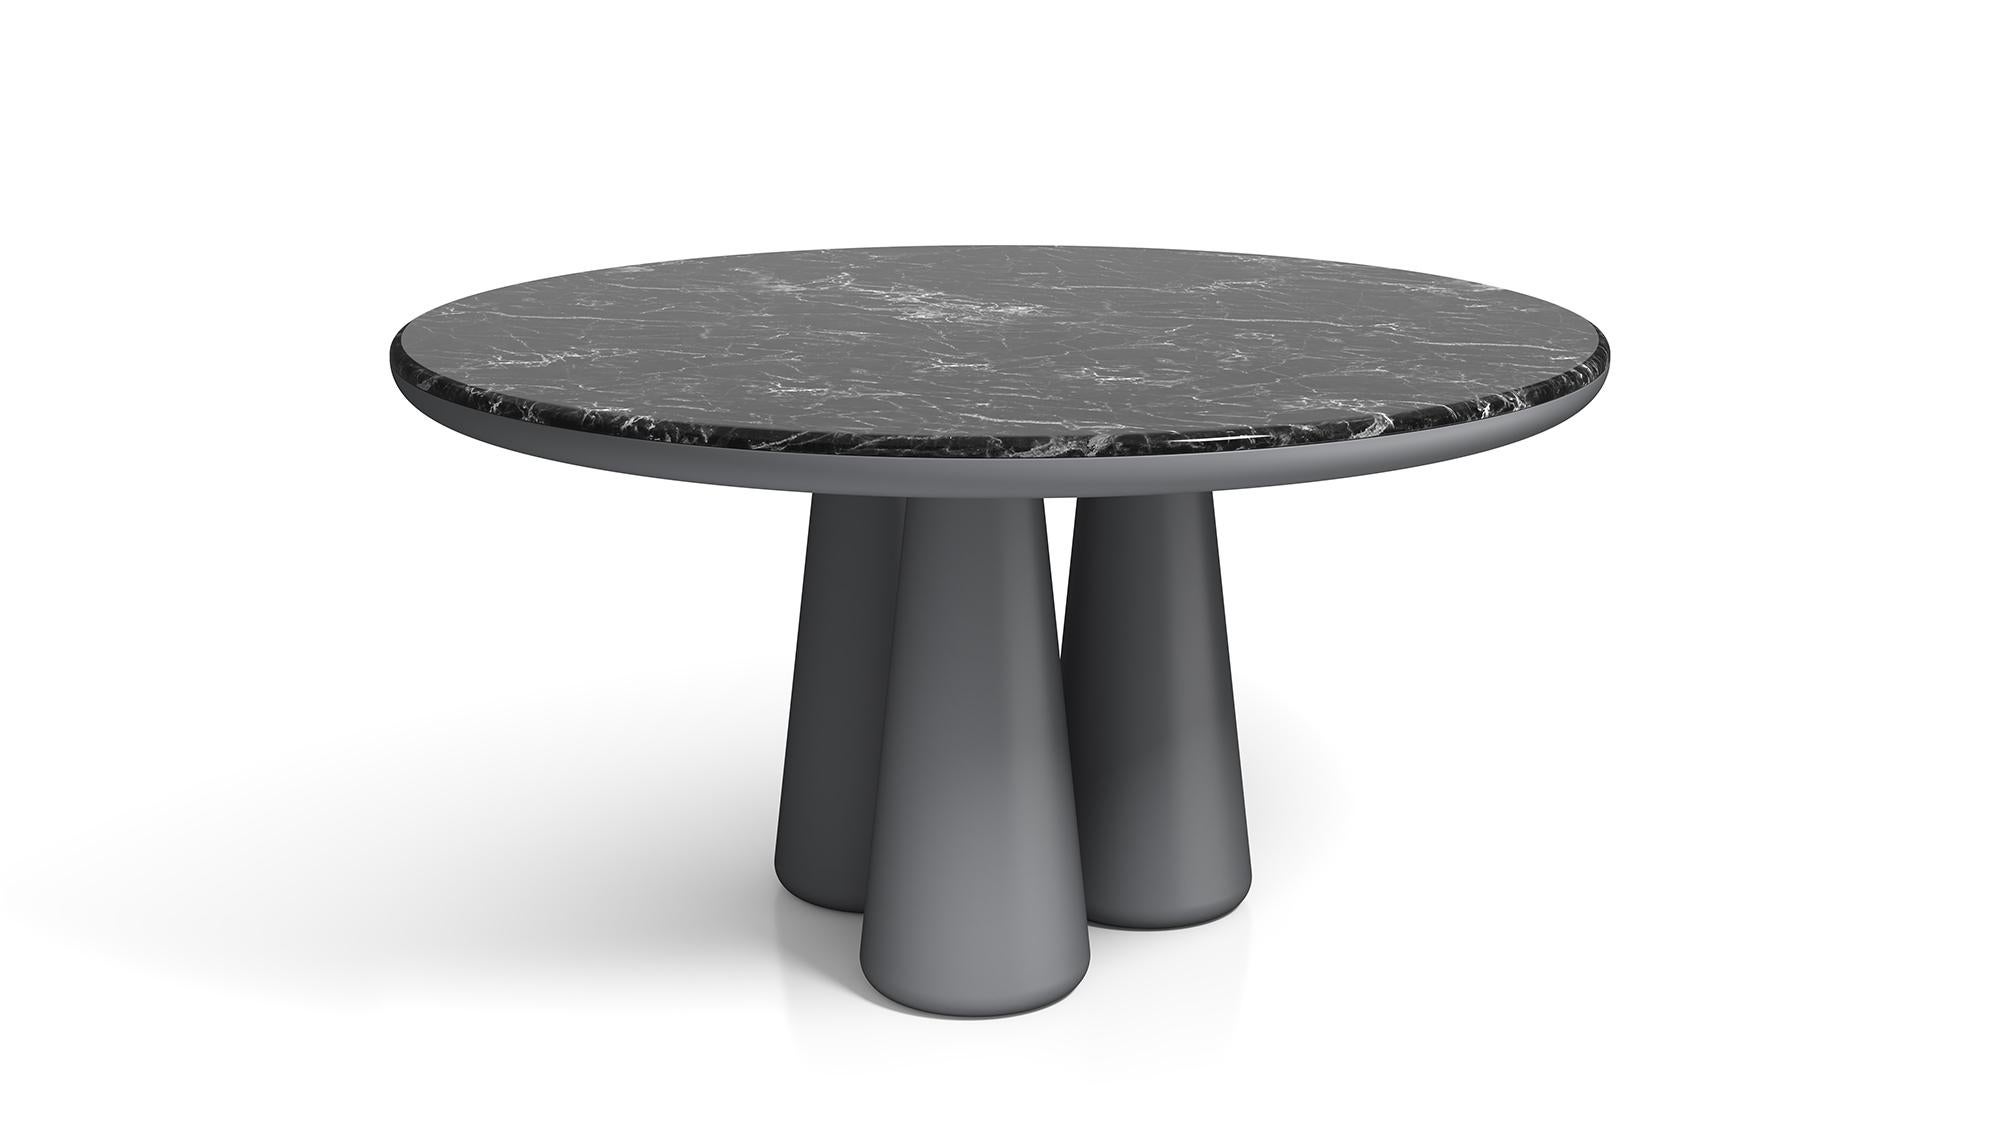 21st Century Elena Salmistraro Table Polyurethane Pinta Verde Marble Glossy In New Condition For Sale In Tezze sul Brenta, IT